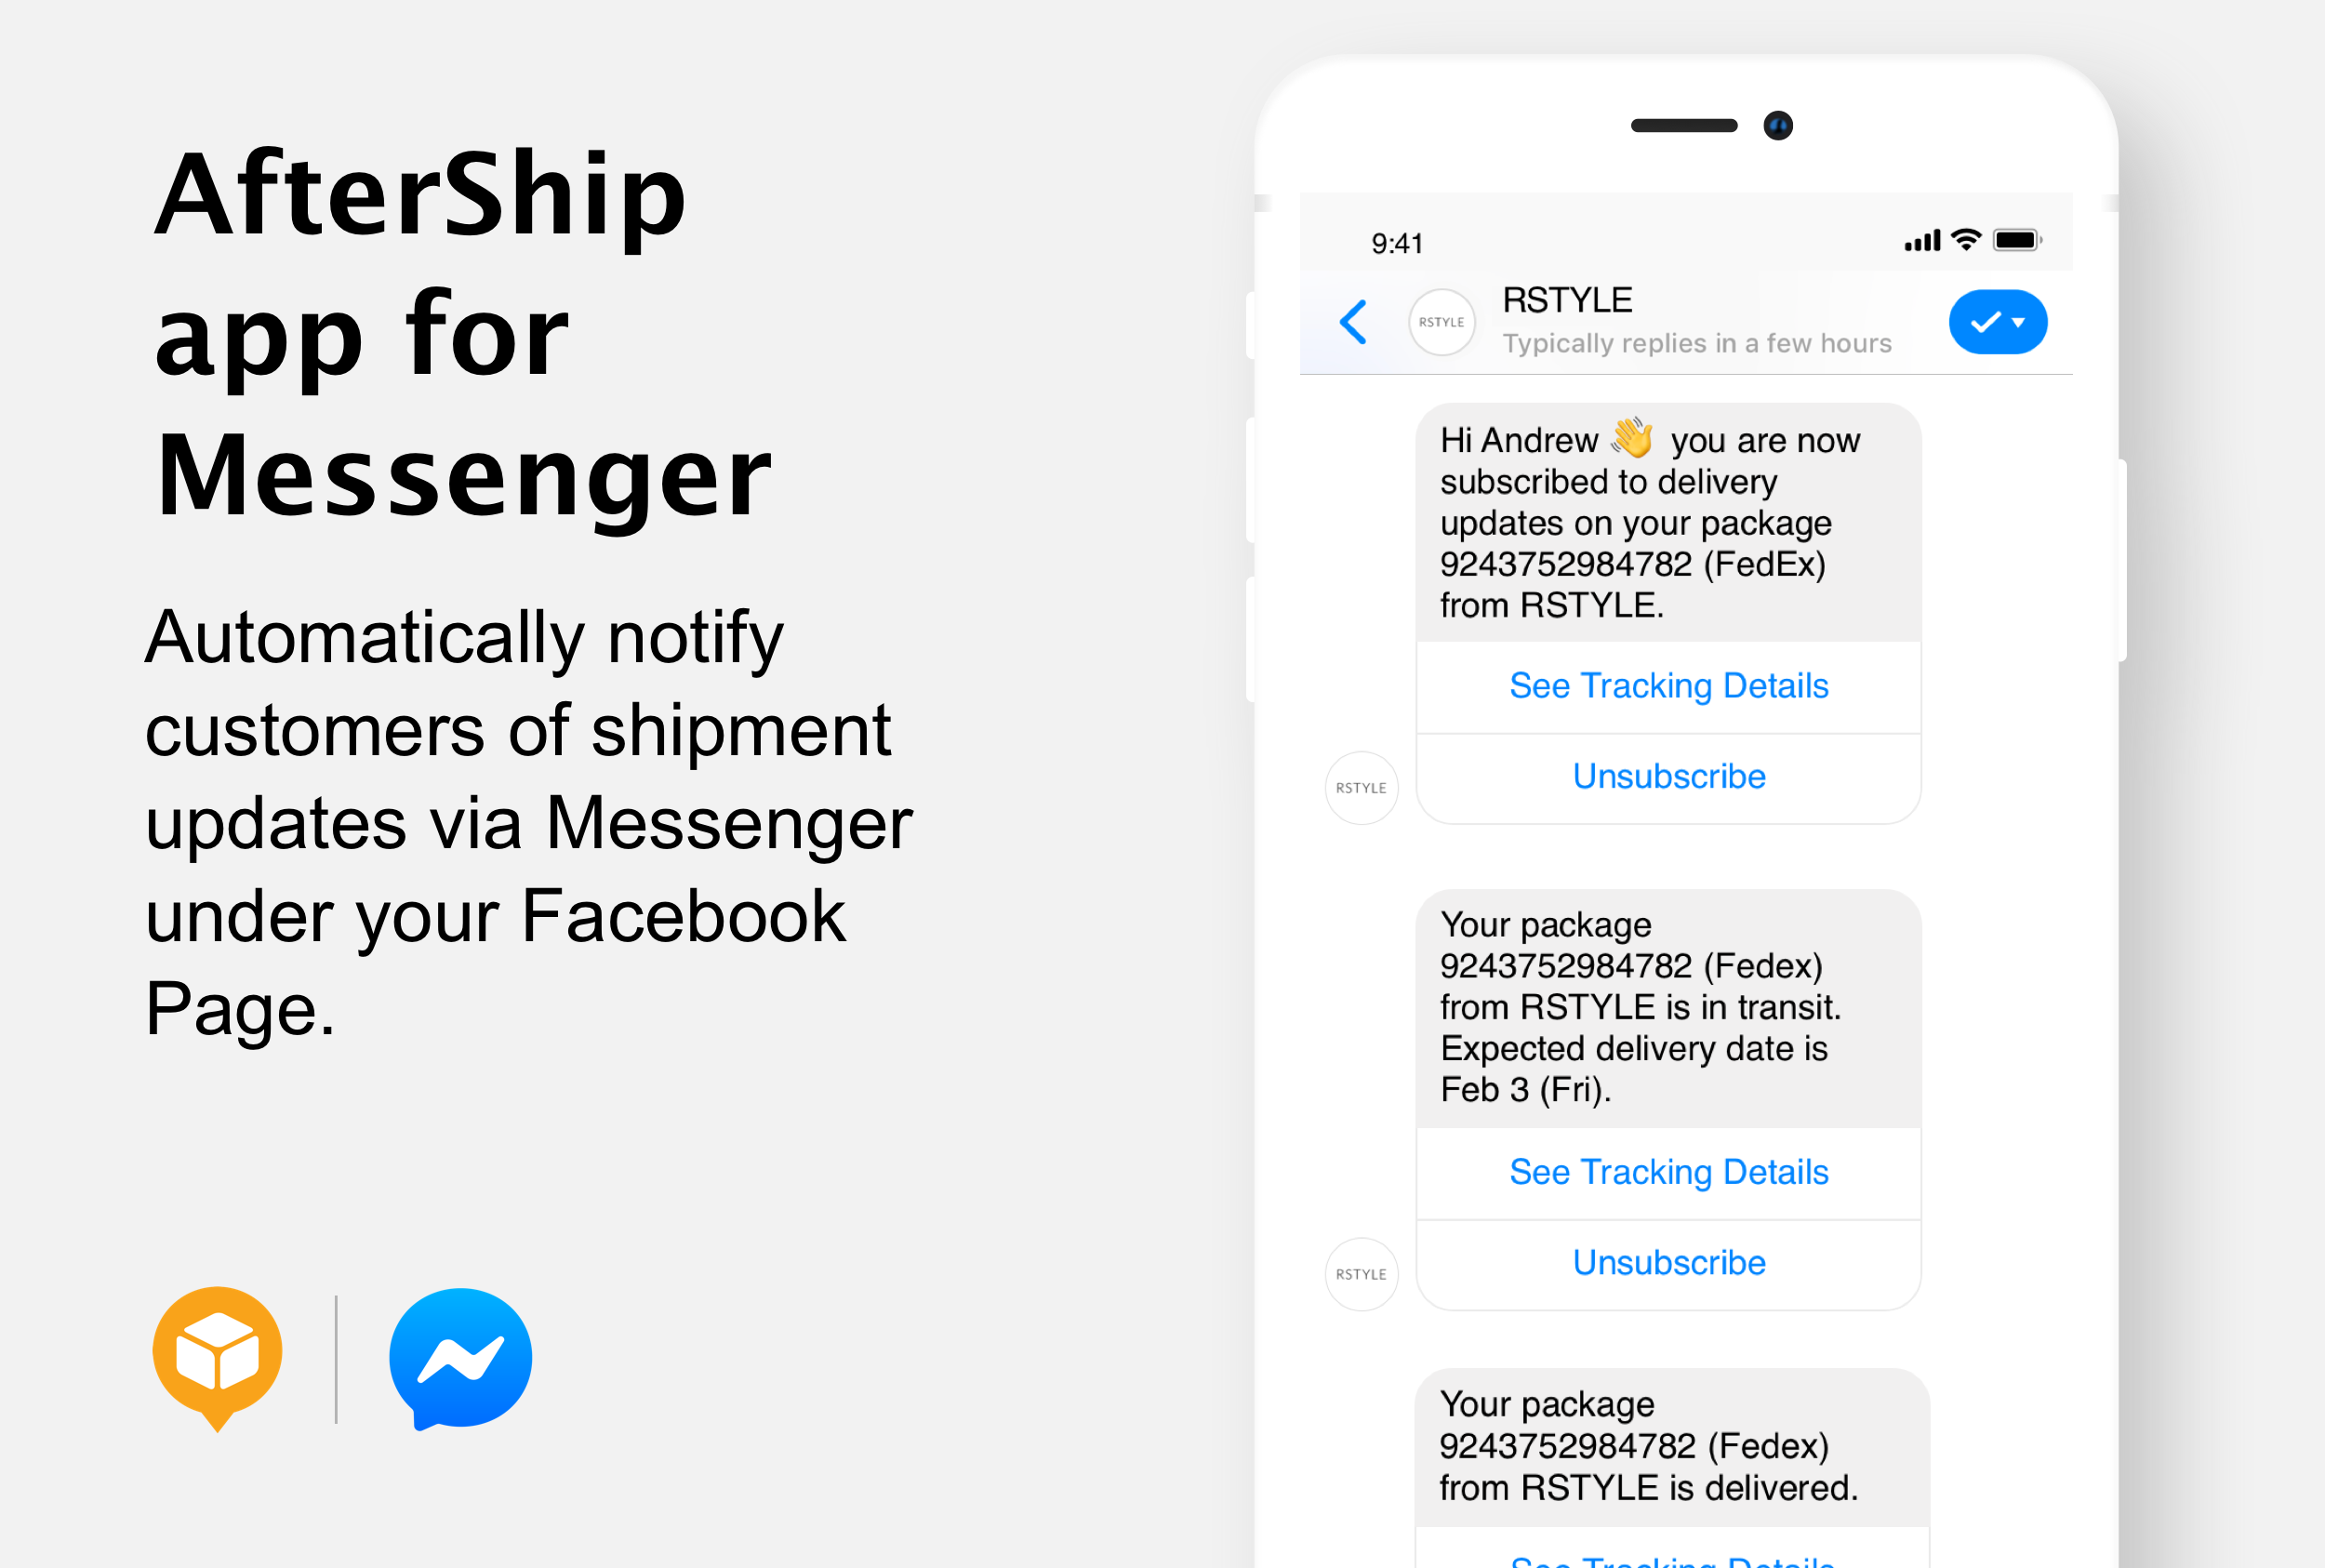 Launching AfterShip for Facebook Messenger